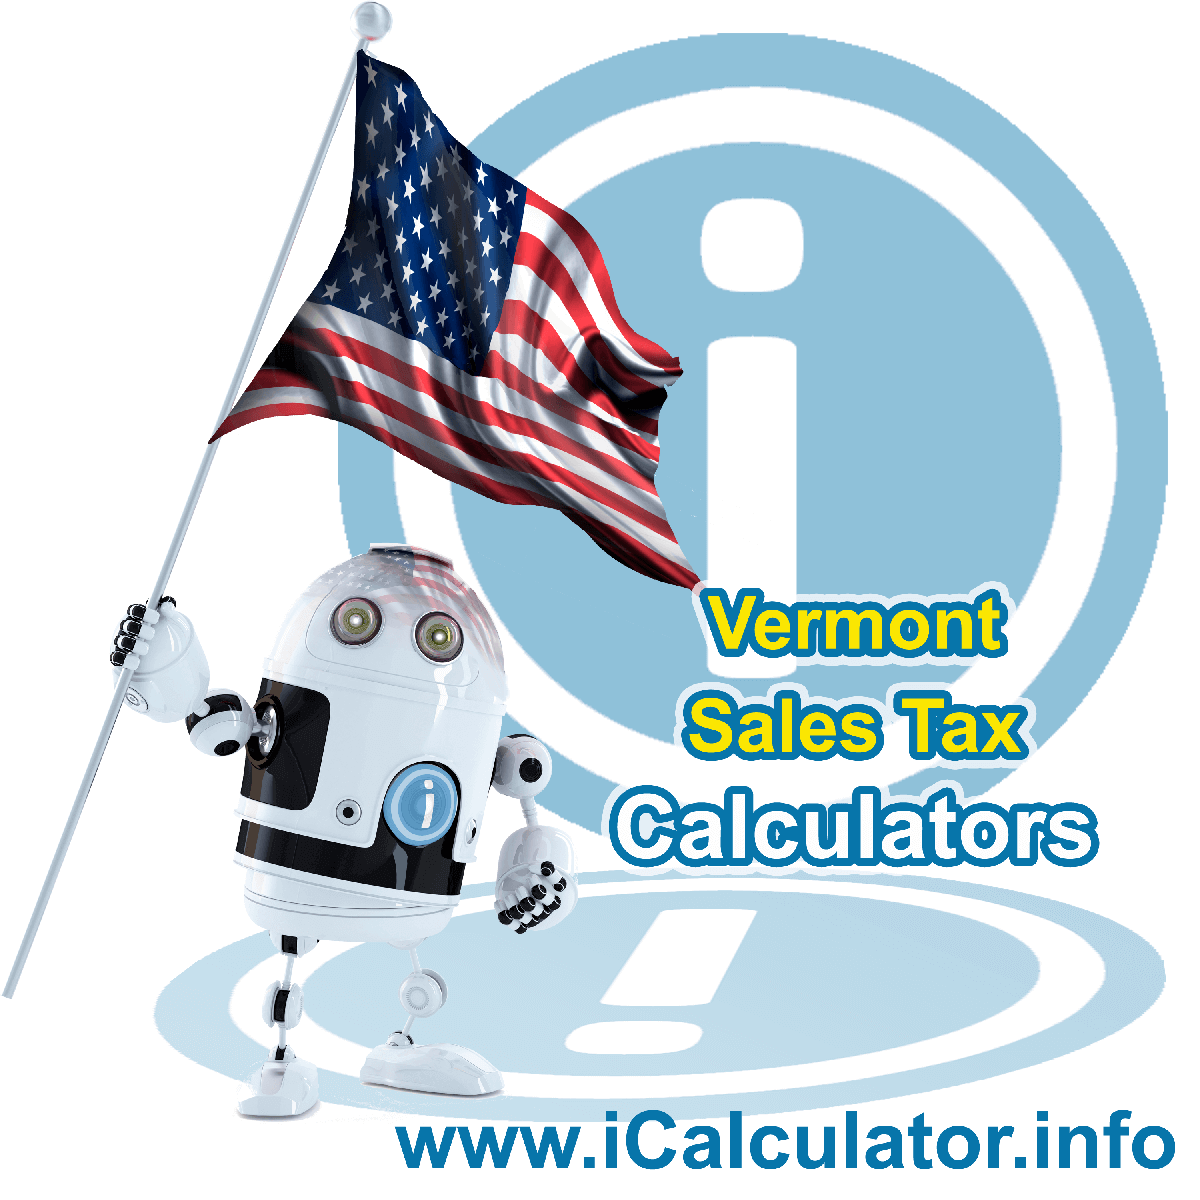 Wilmington Sales Rates: This image illustrates a calculator robot calculating Wilmington sales tax manually using the Wilmington Sales Tax Formula. You can use this information to calculate Wilmington Sales Tax manually or use the Wilmington Sales Tax Calculator to calculate sales tax online.